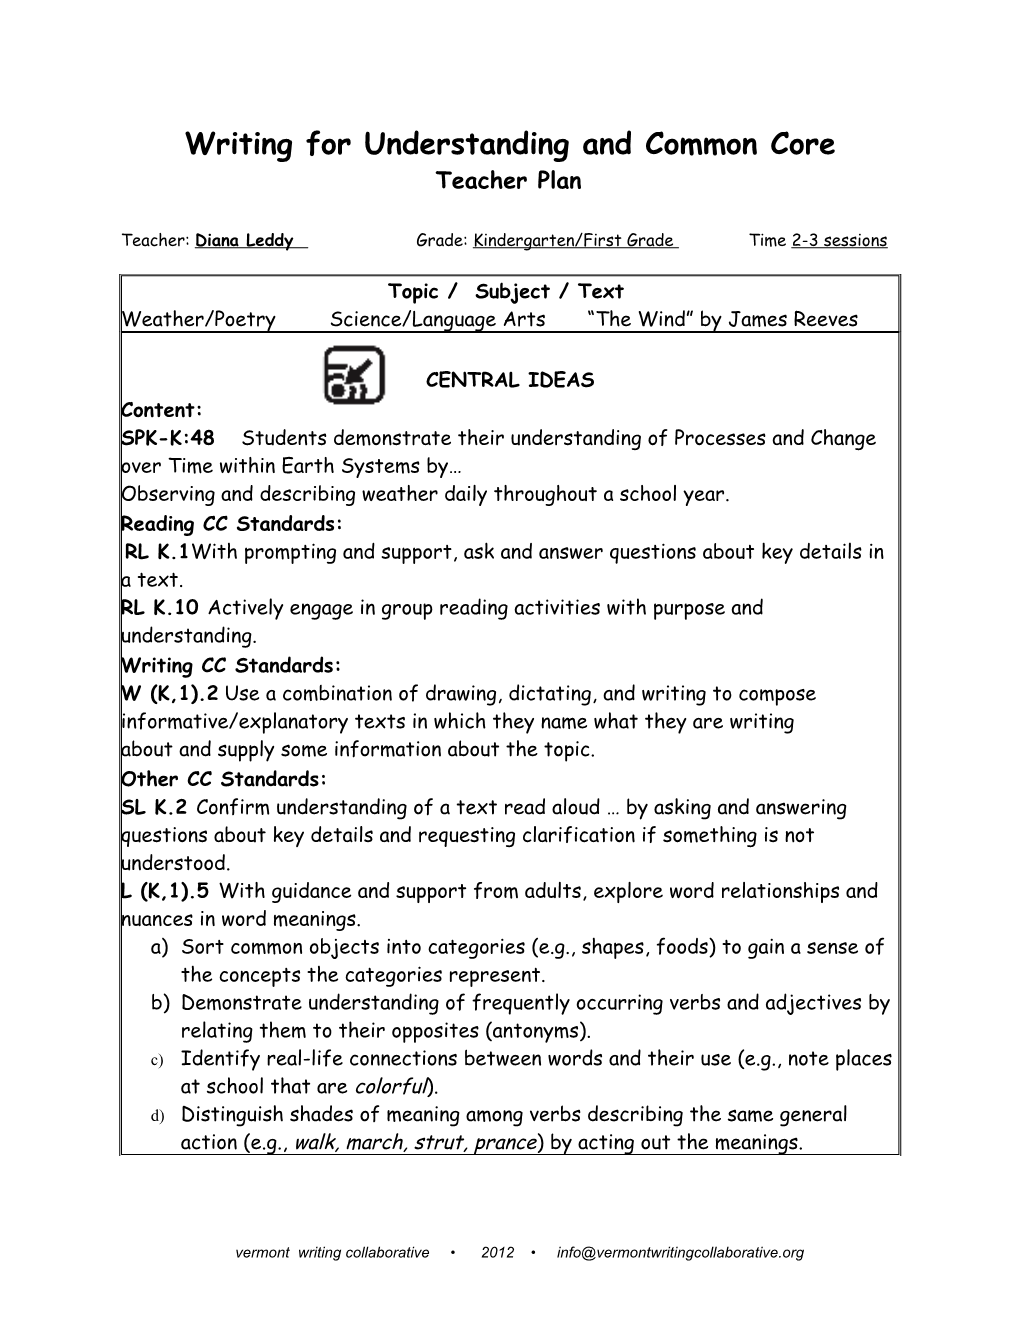 Writing for Understanding Instruction